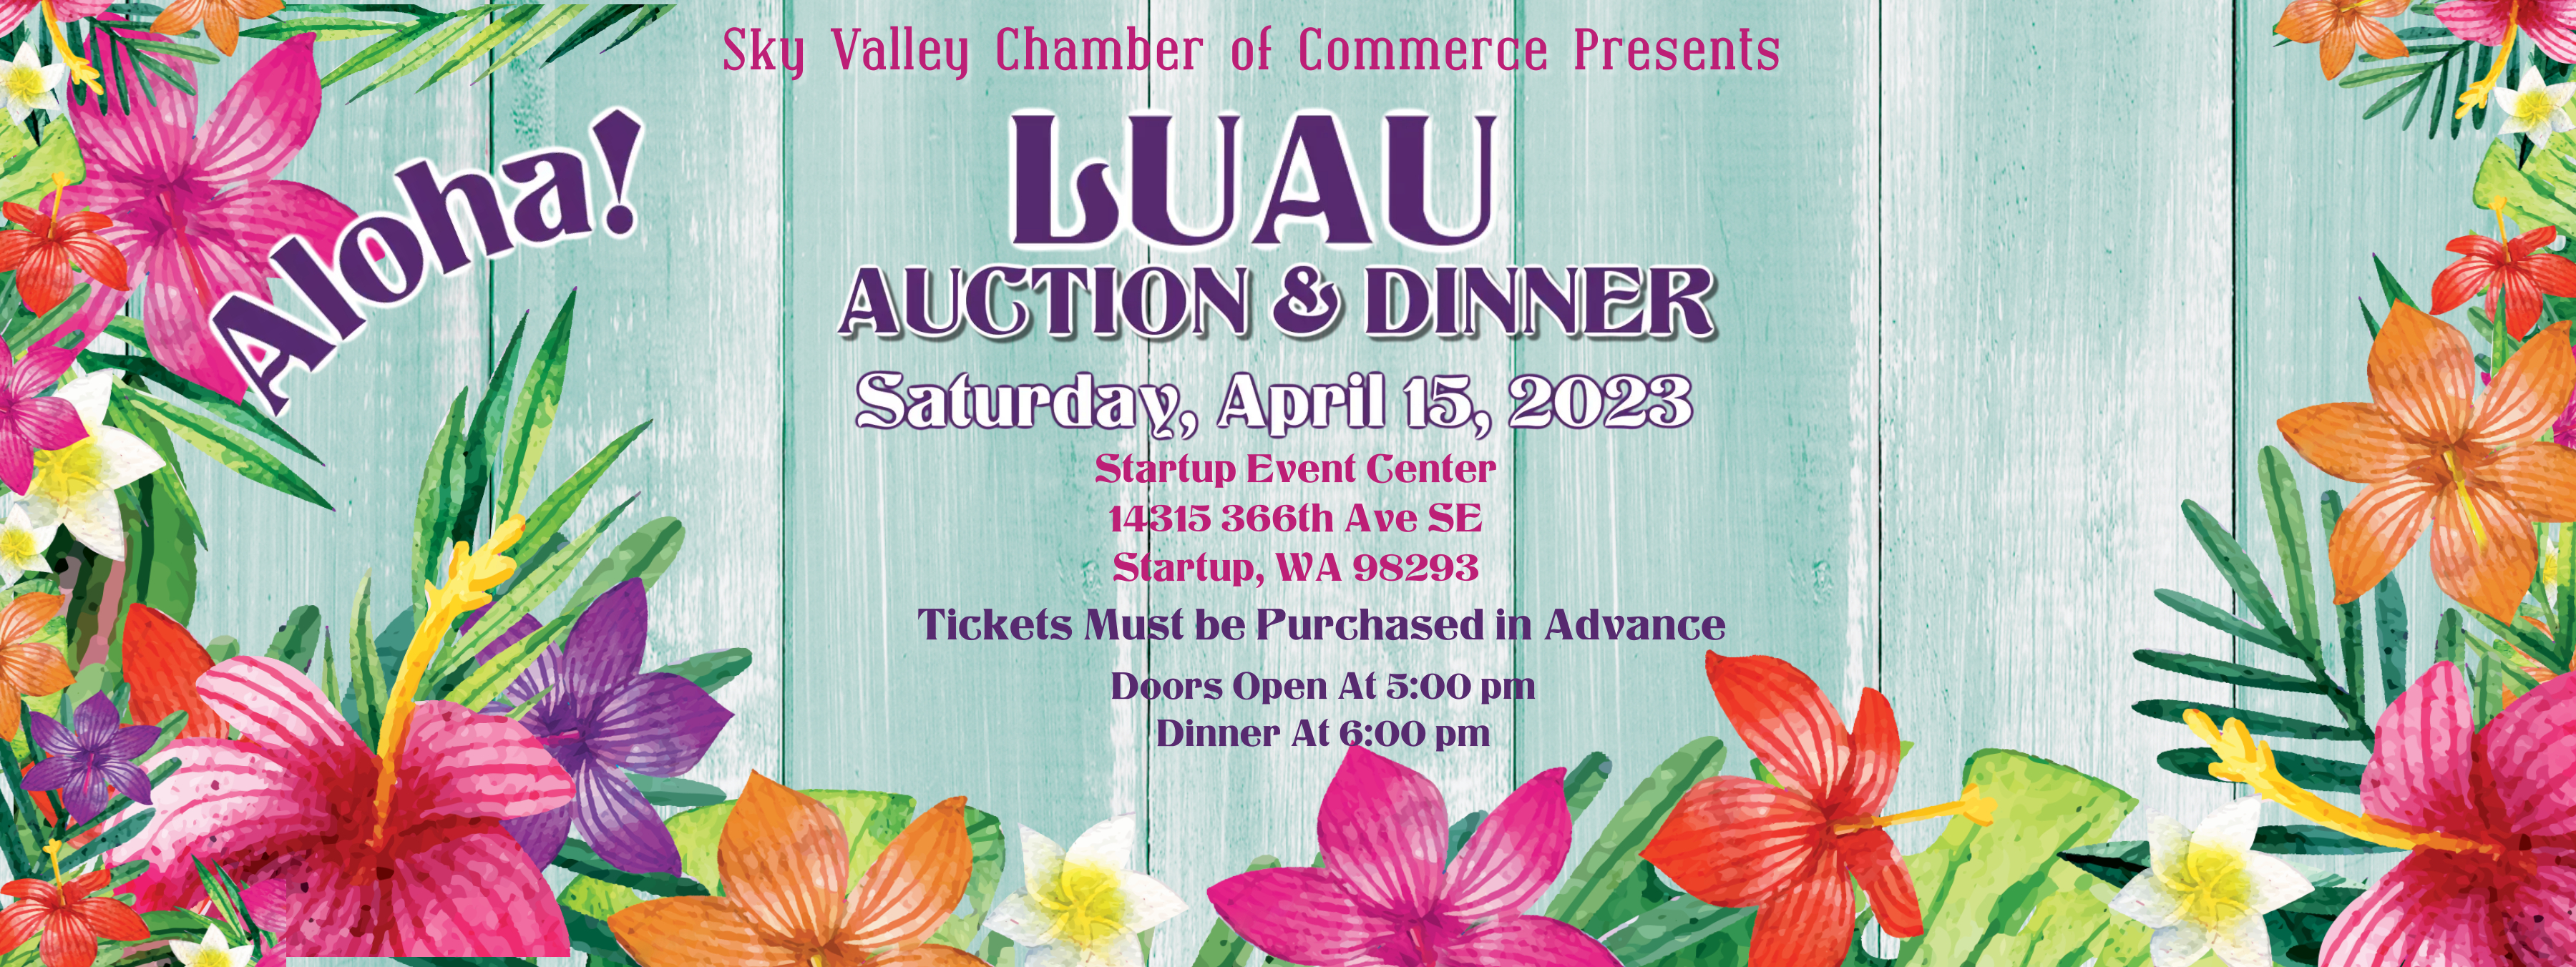 Event Promo Photo For Sky Valley Chamber Luau Dinner & Auction